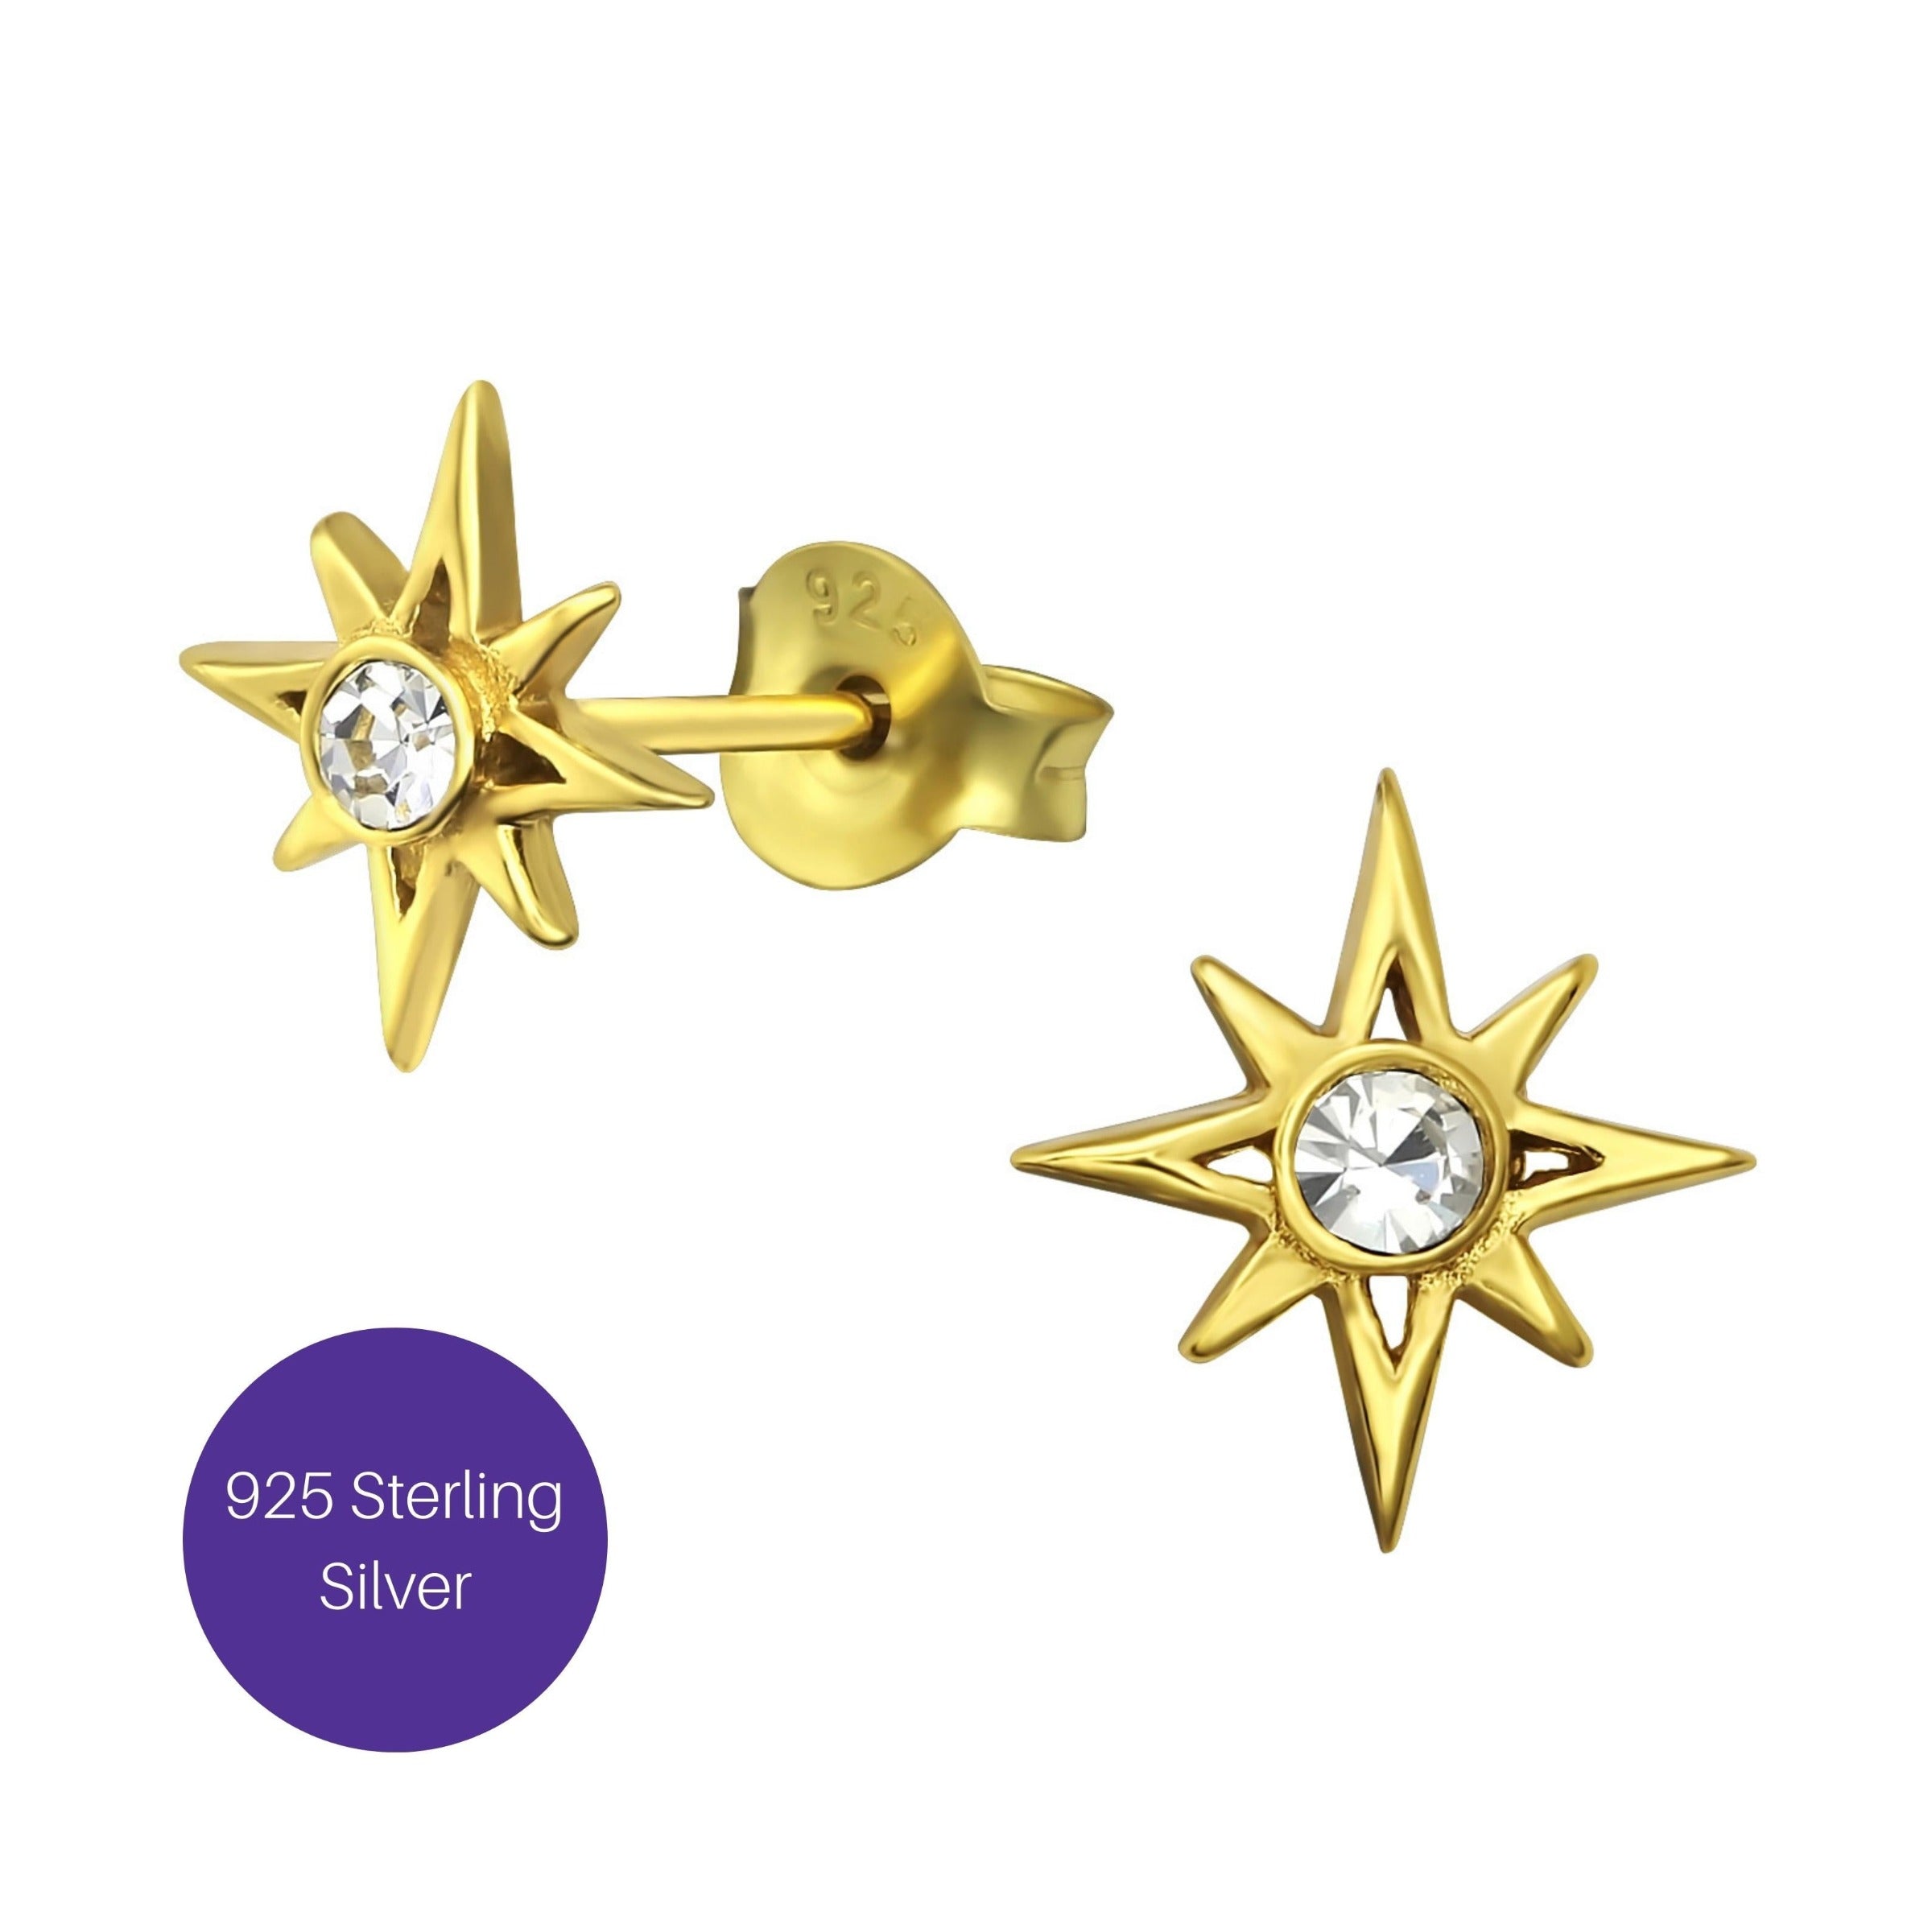 North Star Stud Earrings in Gold Besom Boutique